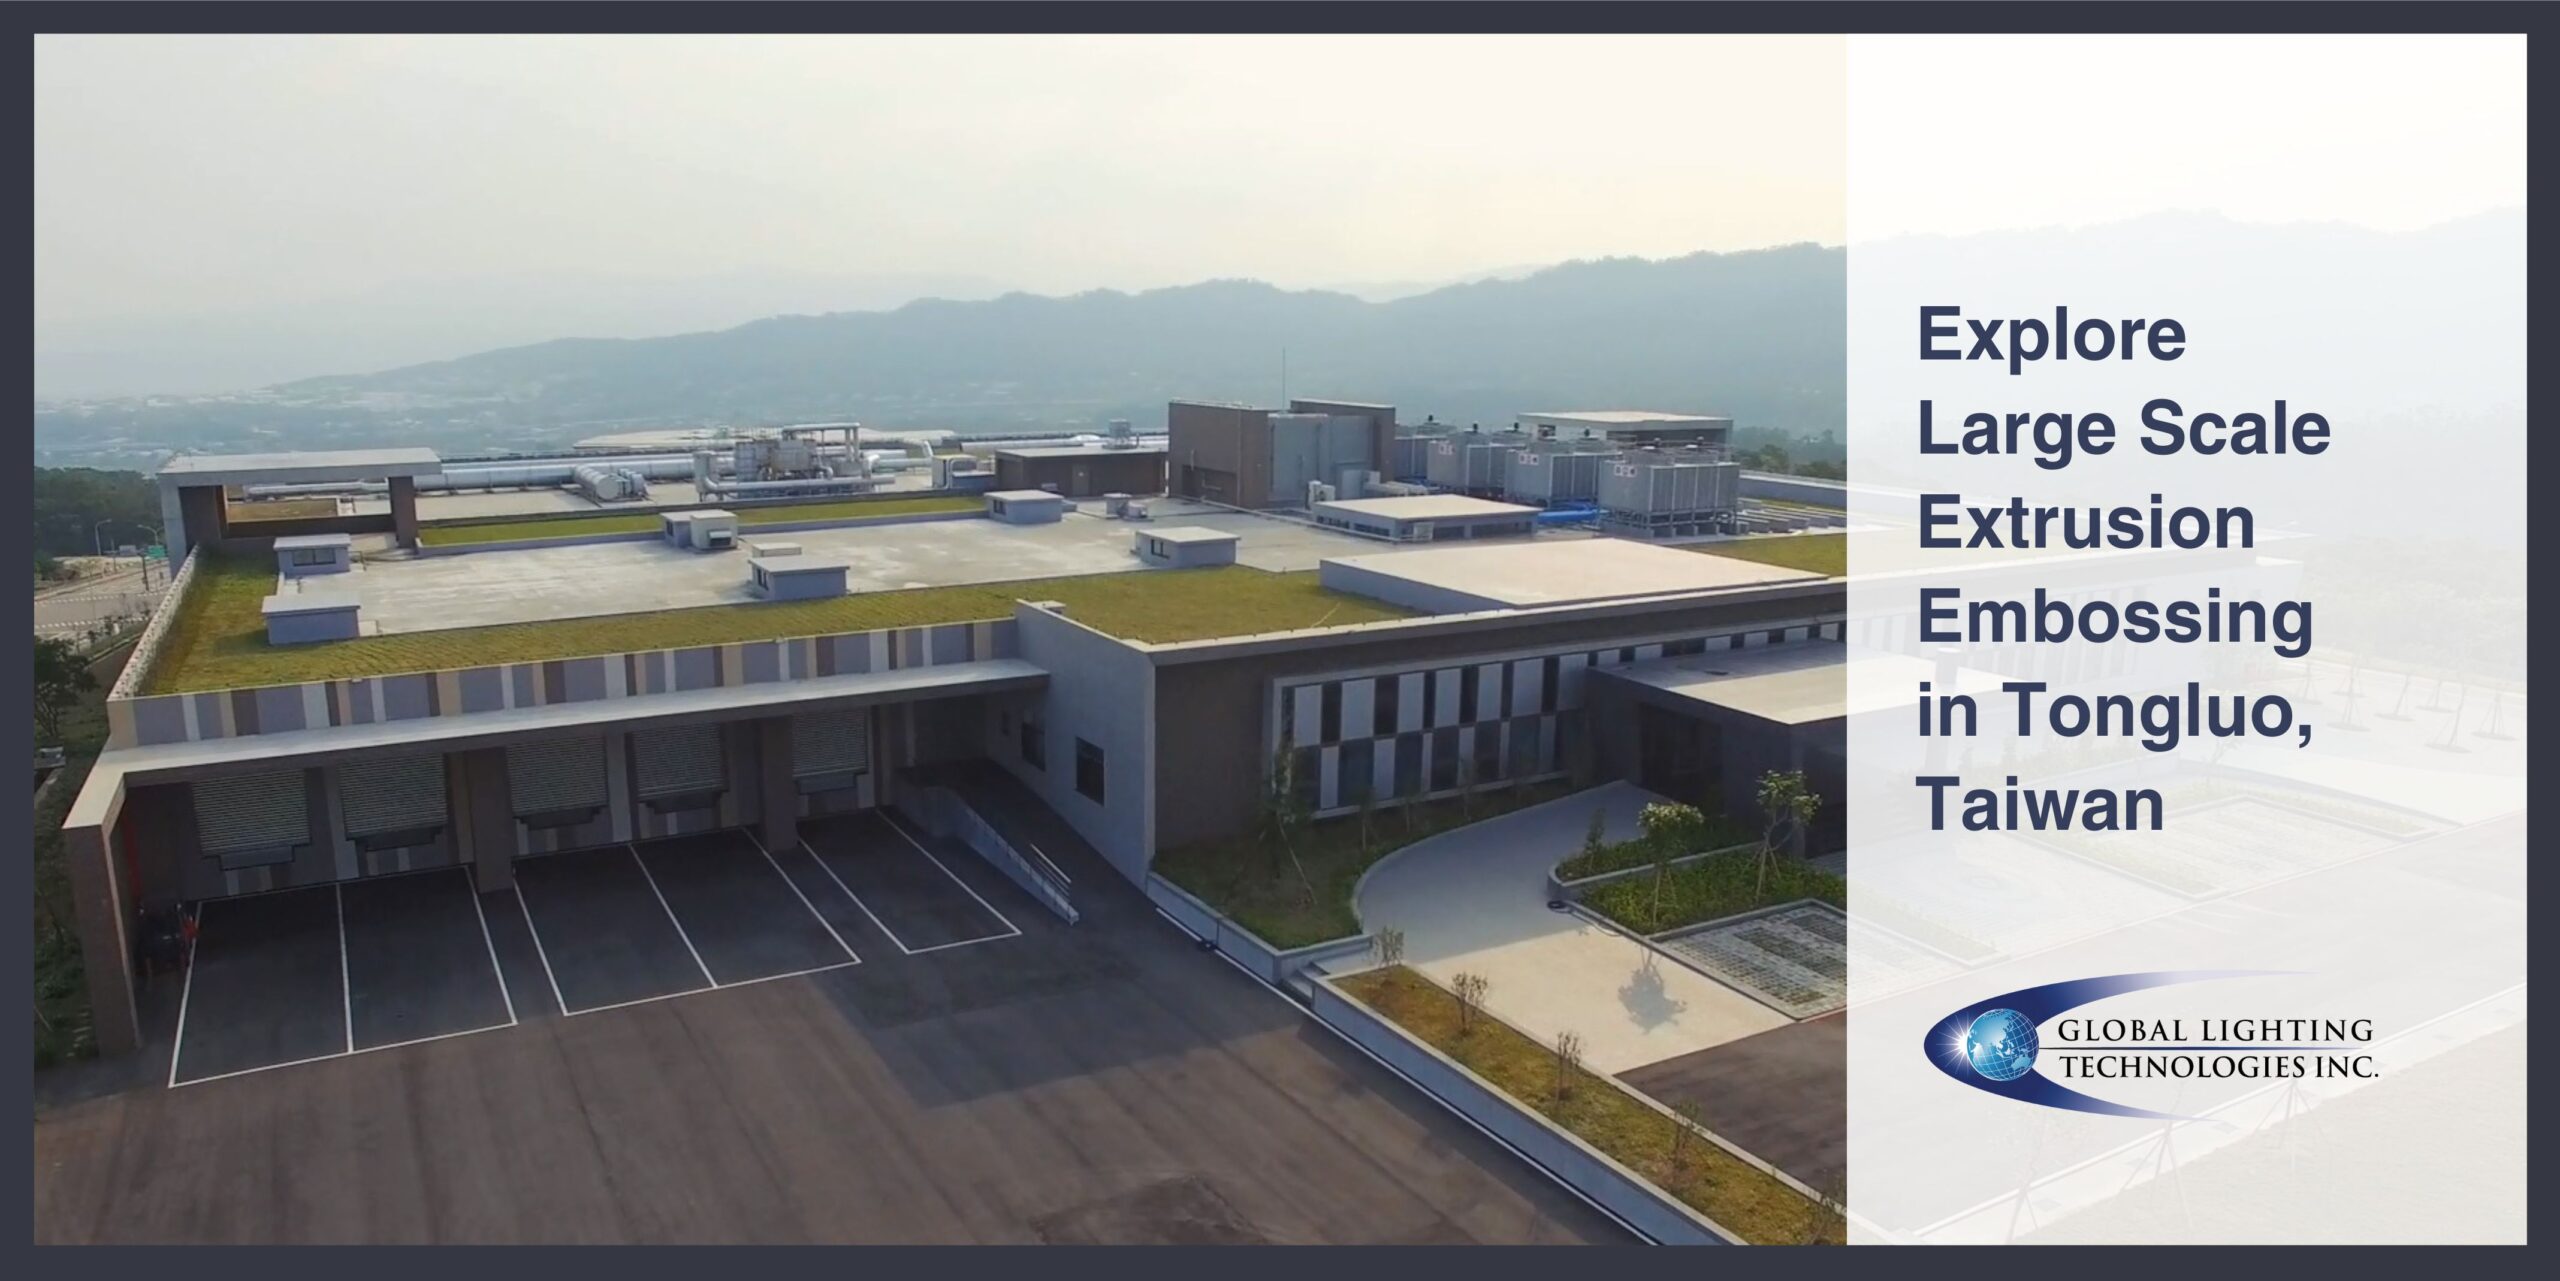 An aerial view of our Tonluo, Taiwan production facility surrounded by mountains and trees.